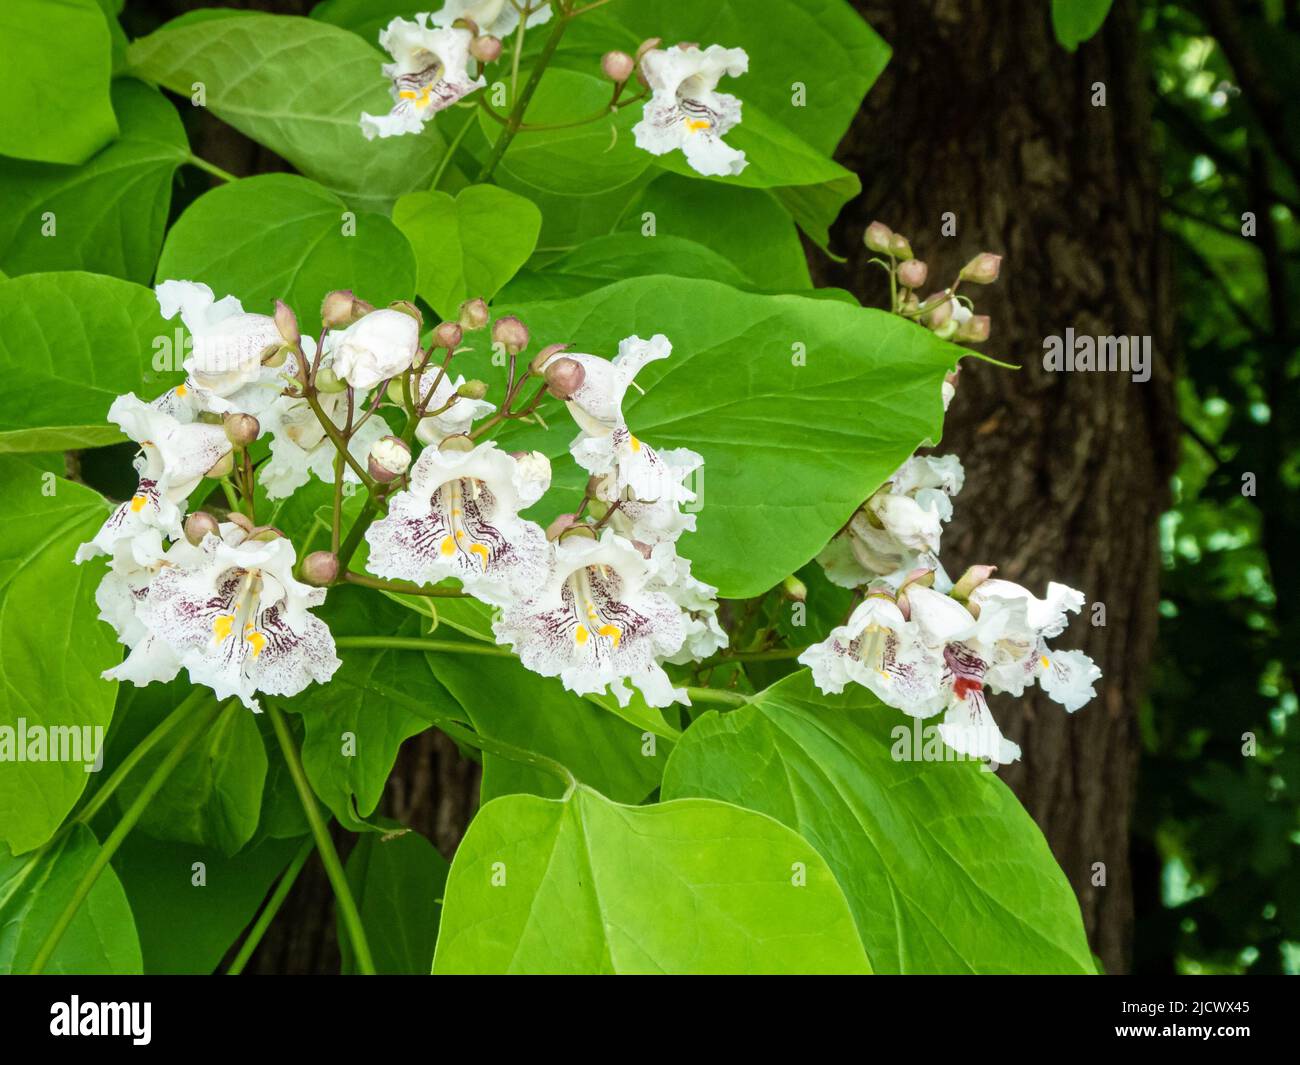 Flowers of the Indian bean tree (Catalpa bignonioides) also known as southern catalpa or cigartree Stock Photo